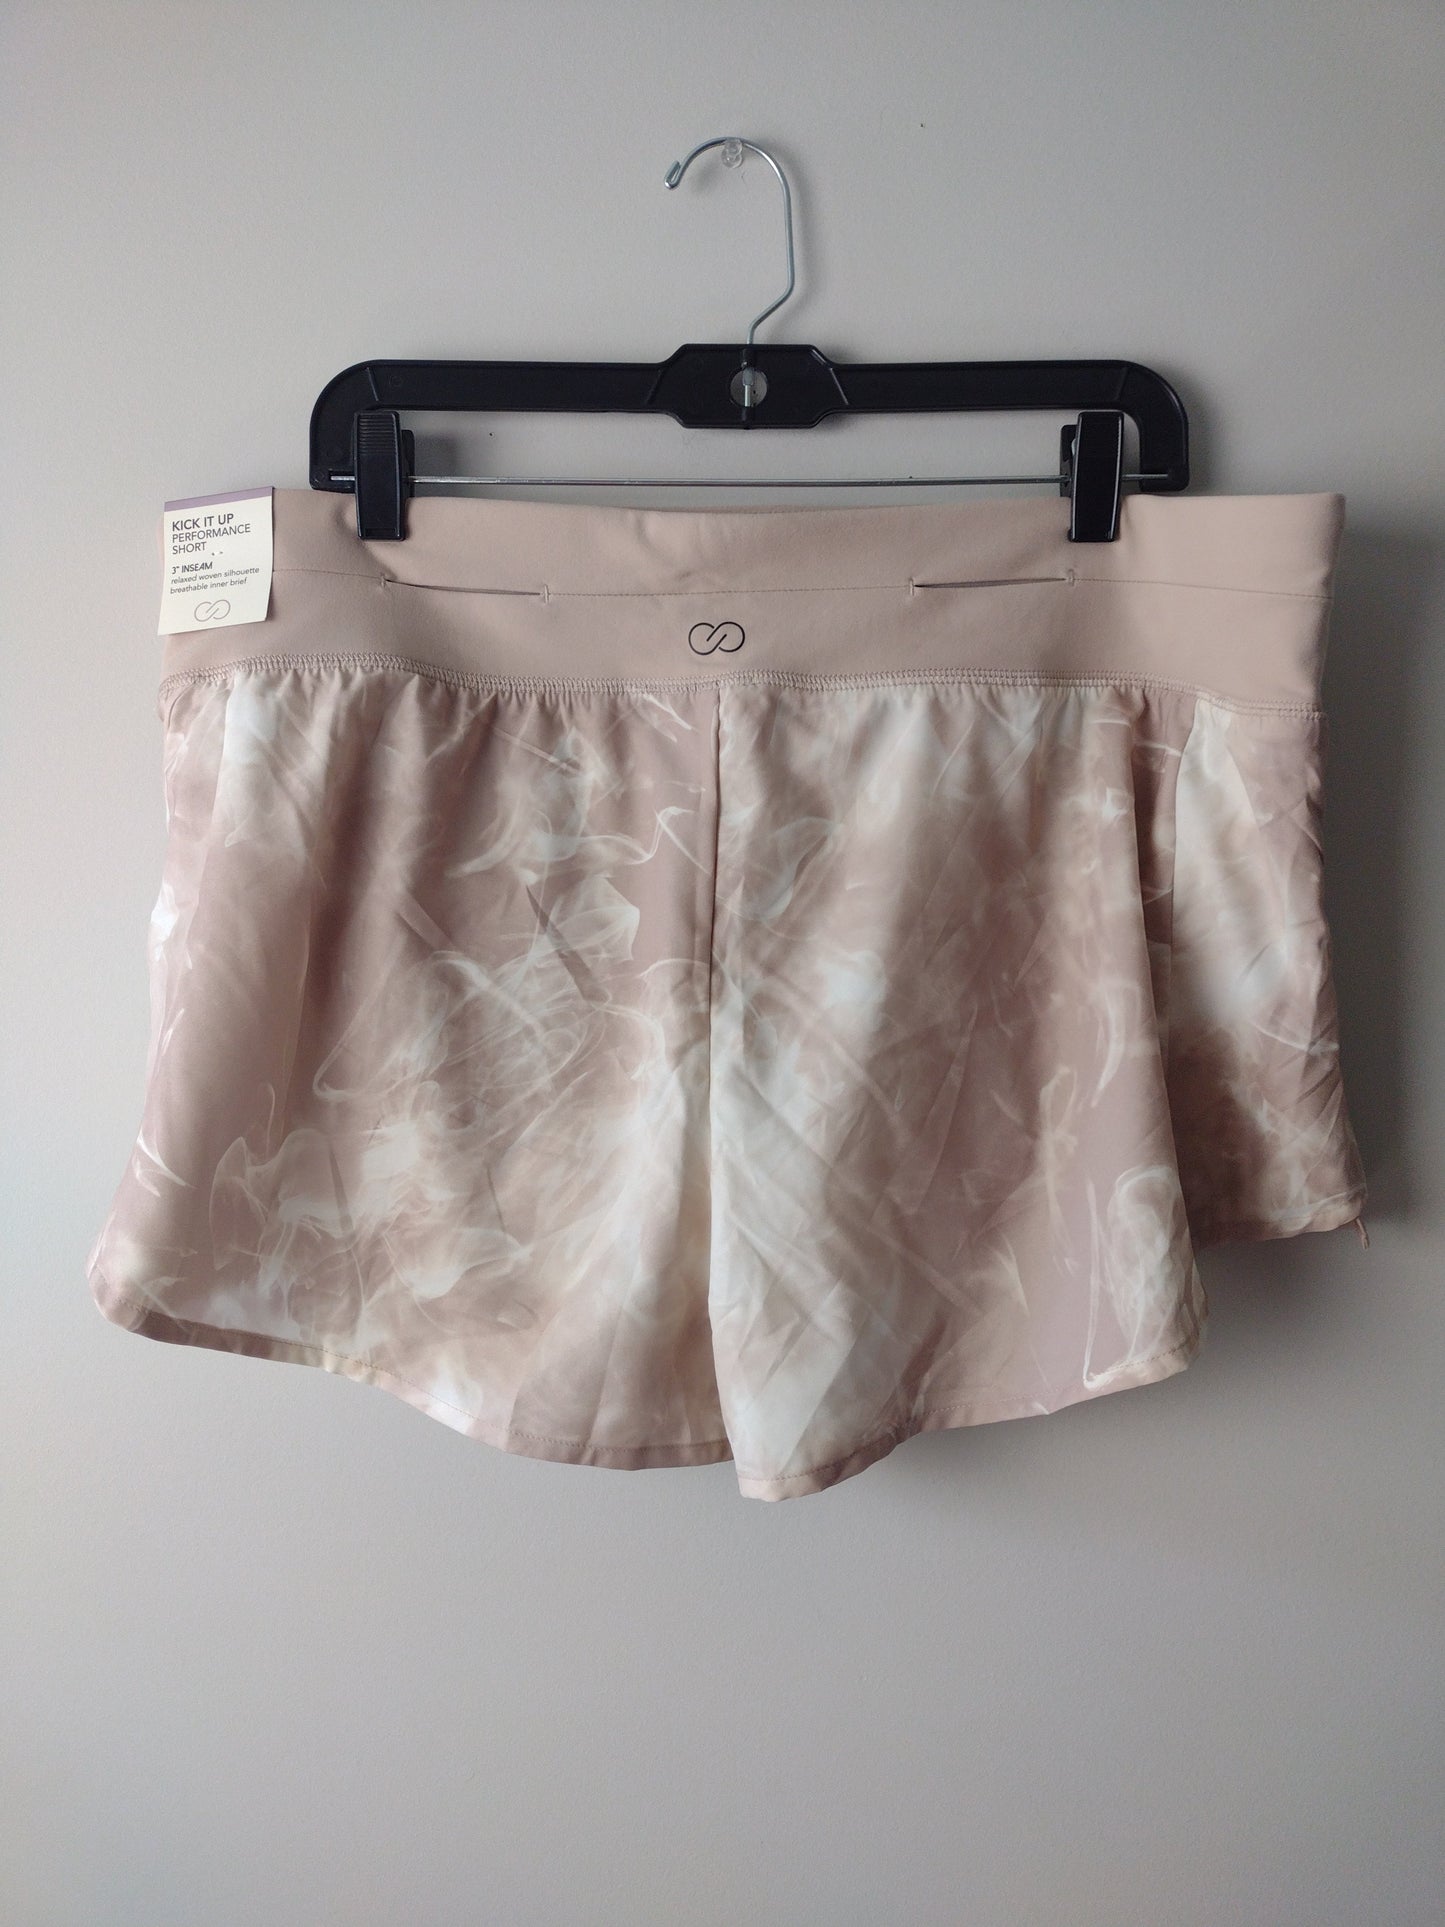 Athletic Shorts By Calia  Size: Xl